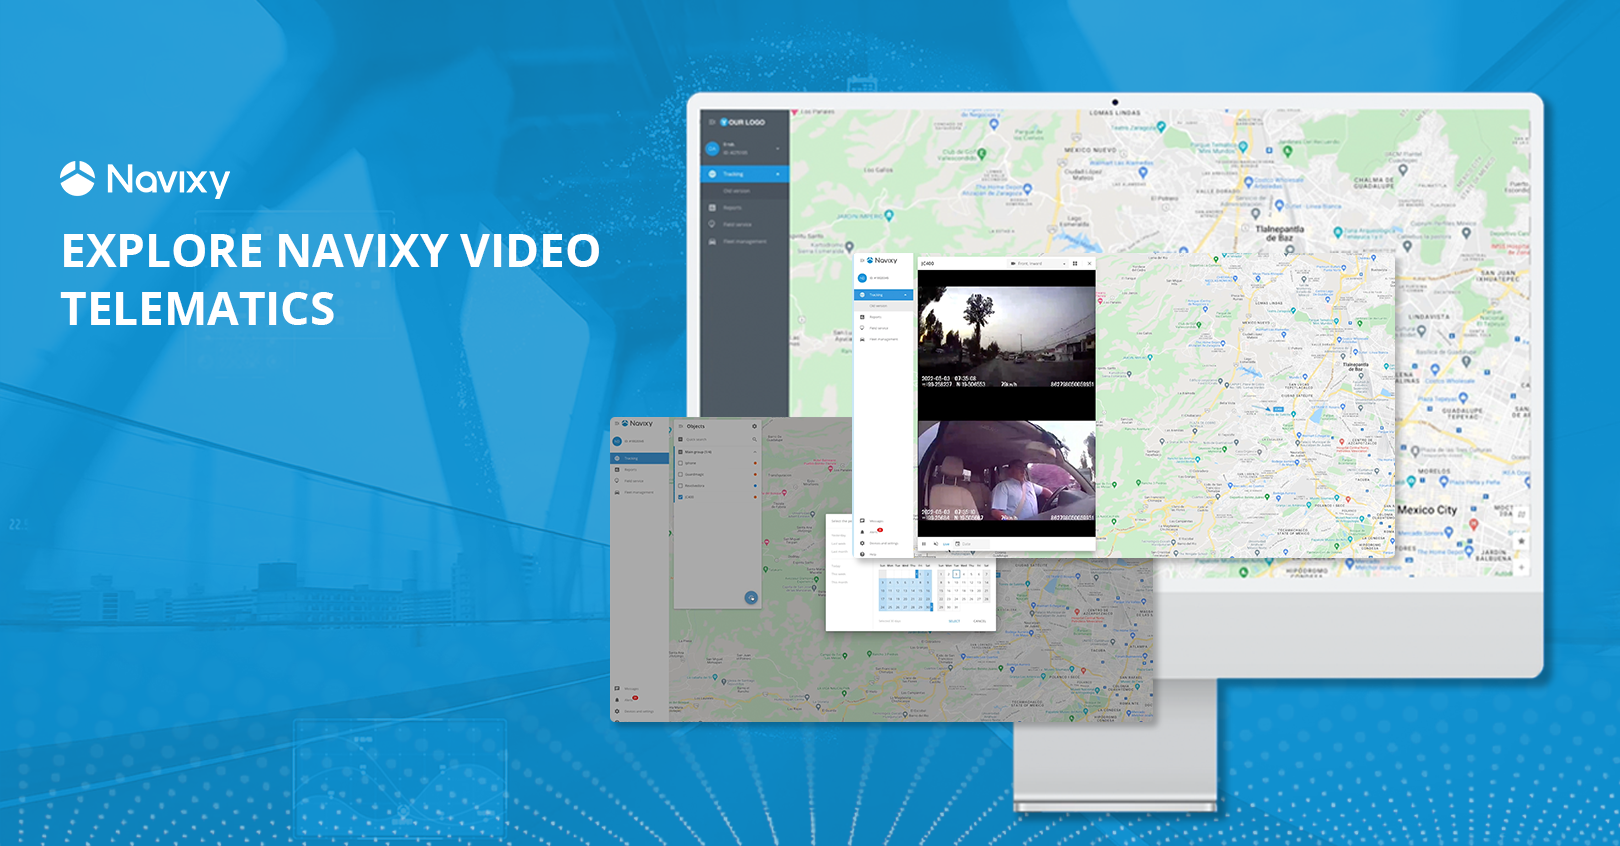 Watch now: Introducing Navixy video telematics